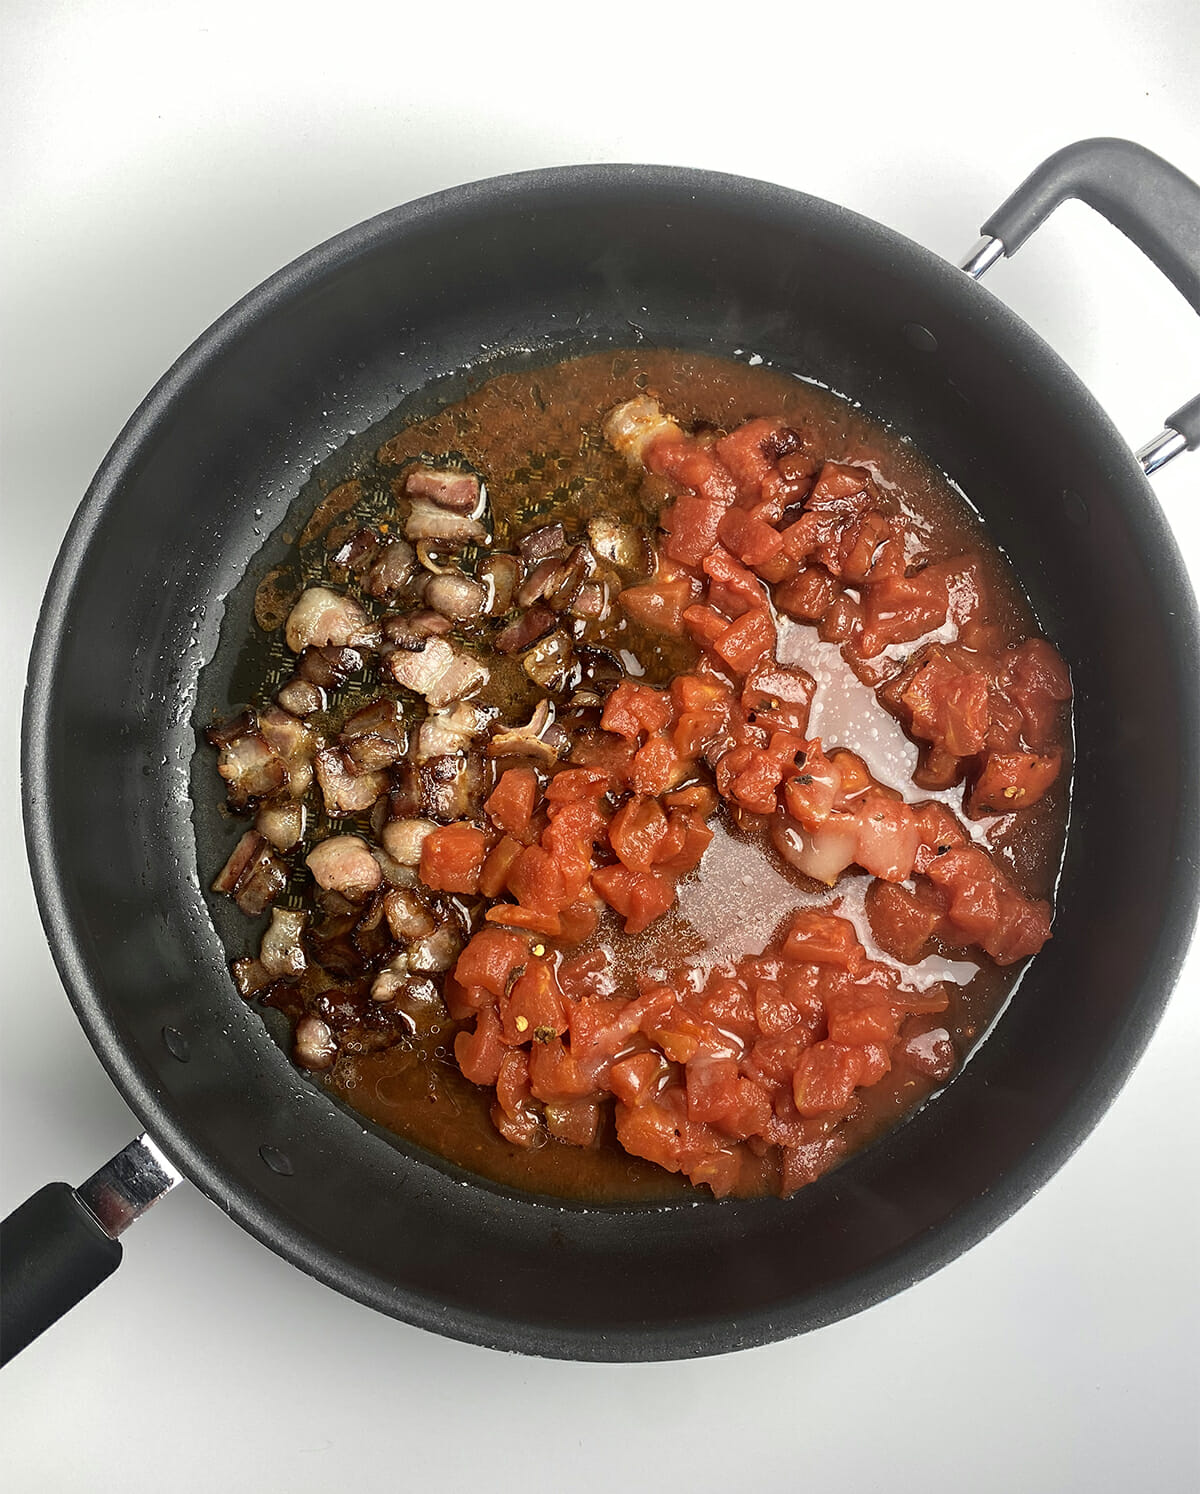 Tomato bacon sauce in a skillet.